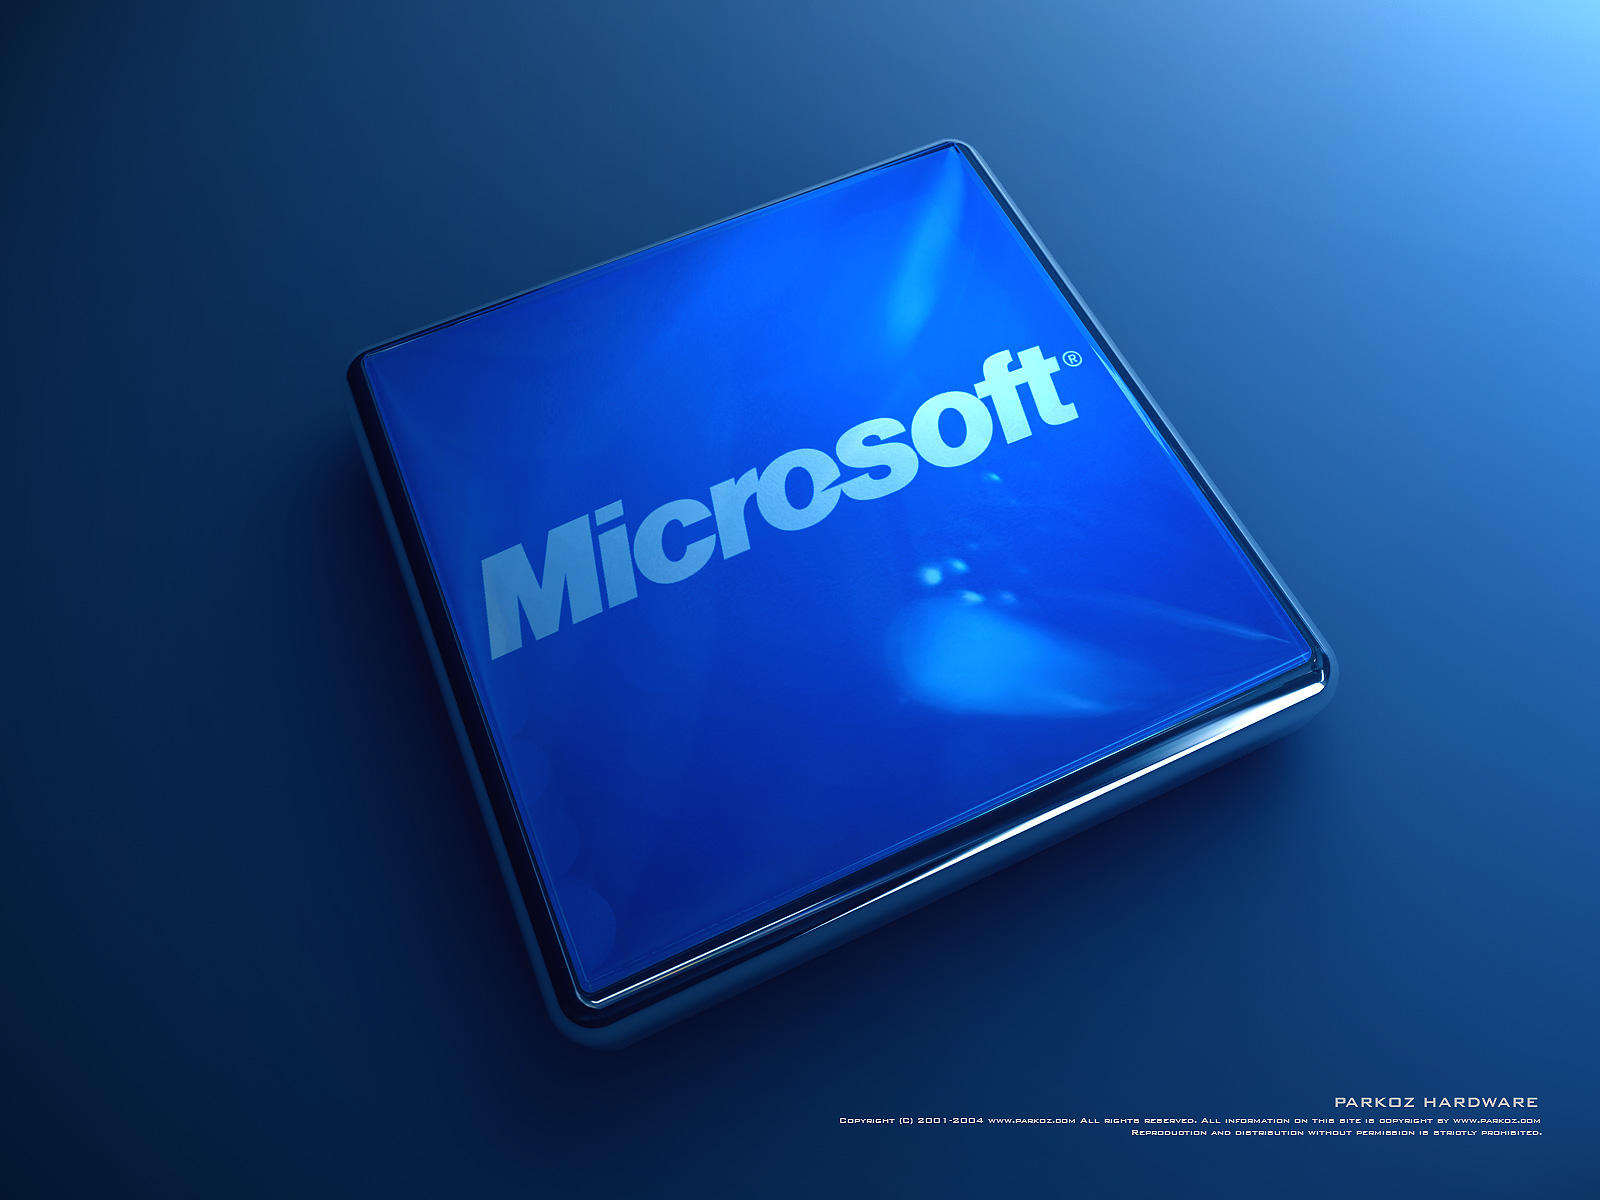  Download Microsoft Wallpapers Photos Pictures and Backgrounds 1600x1200